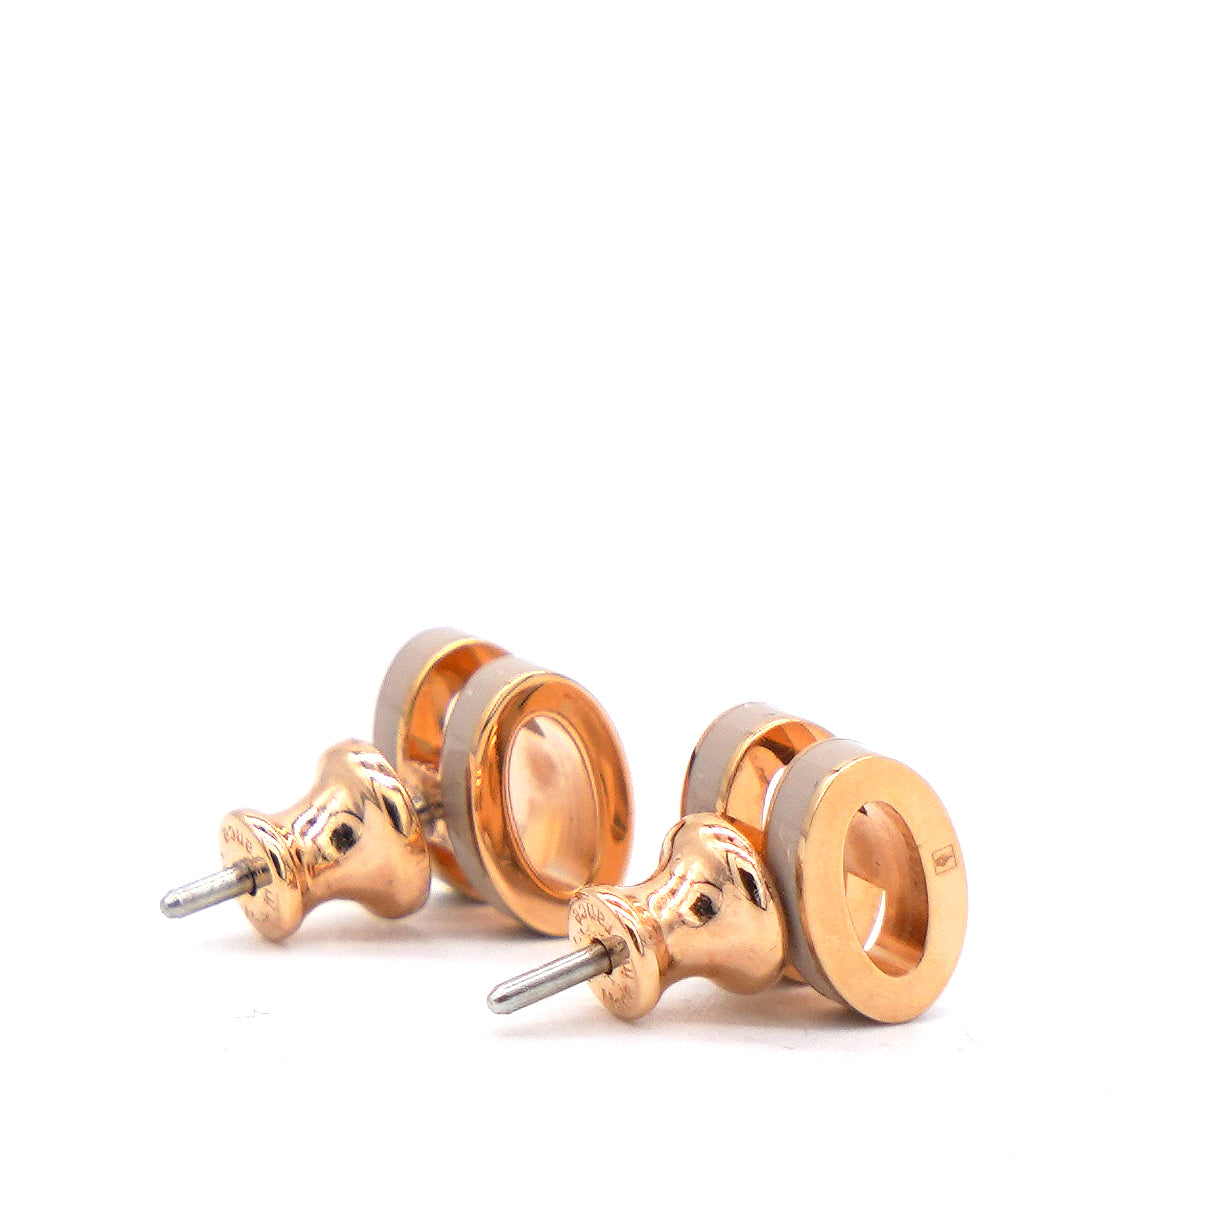 Lacquered Pop H Mini Earrings Marron Glace